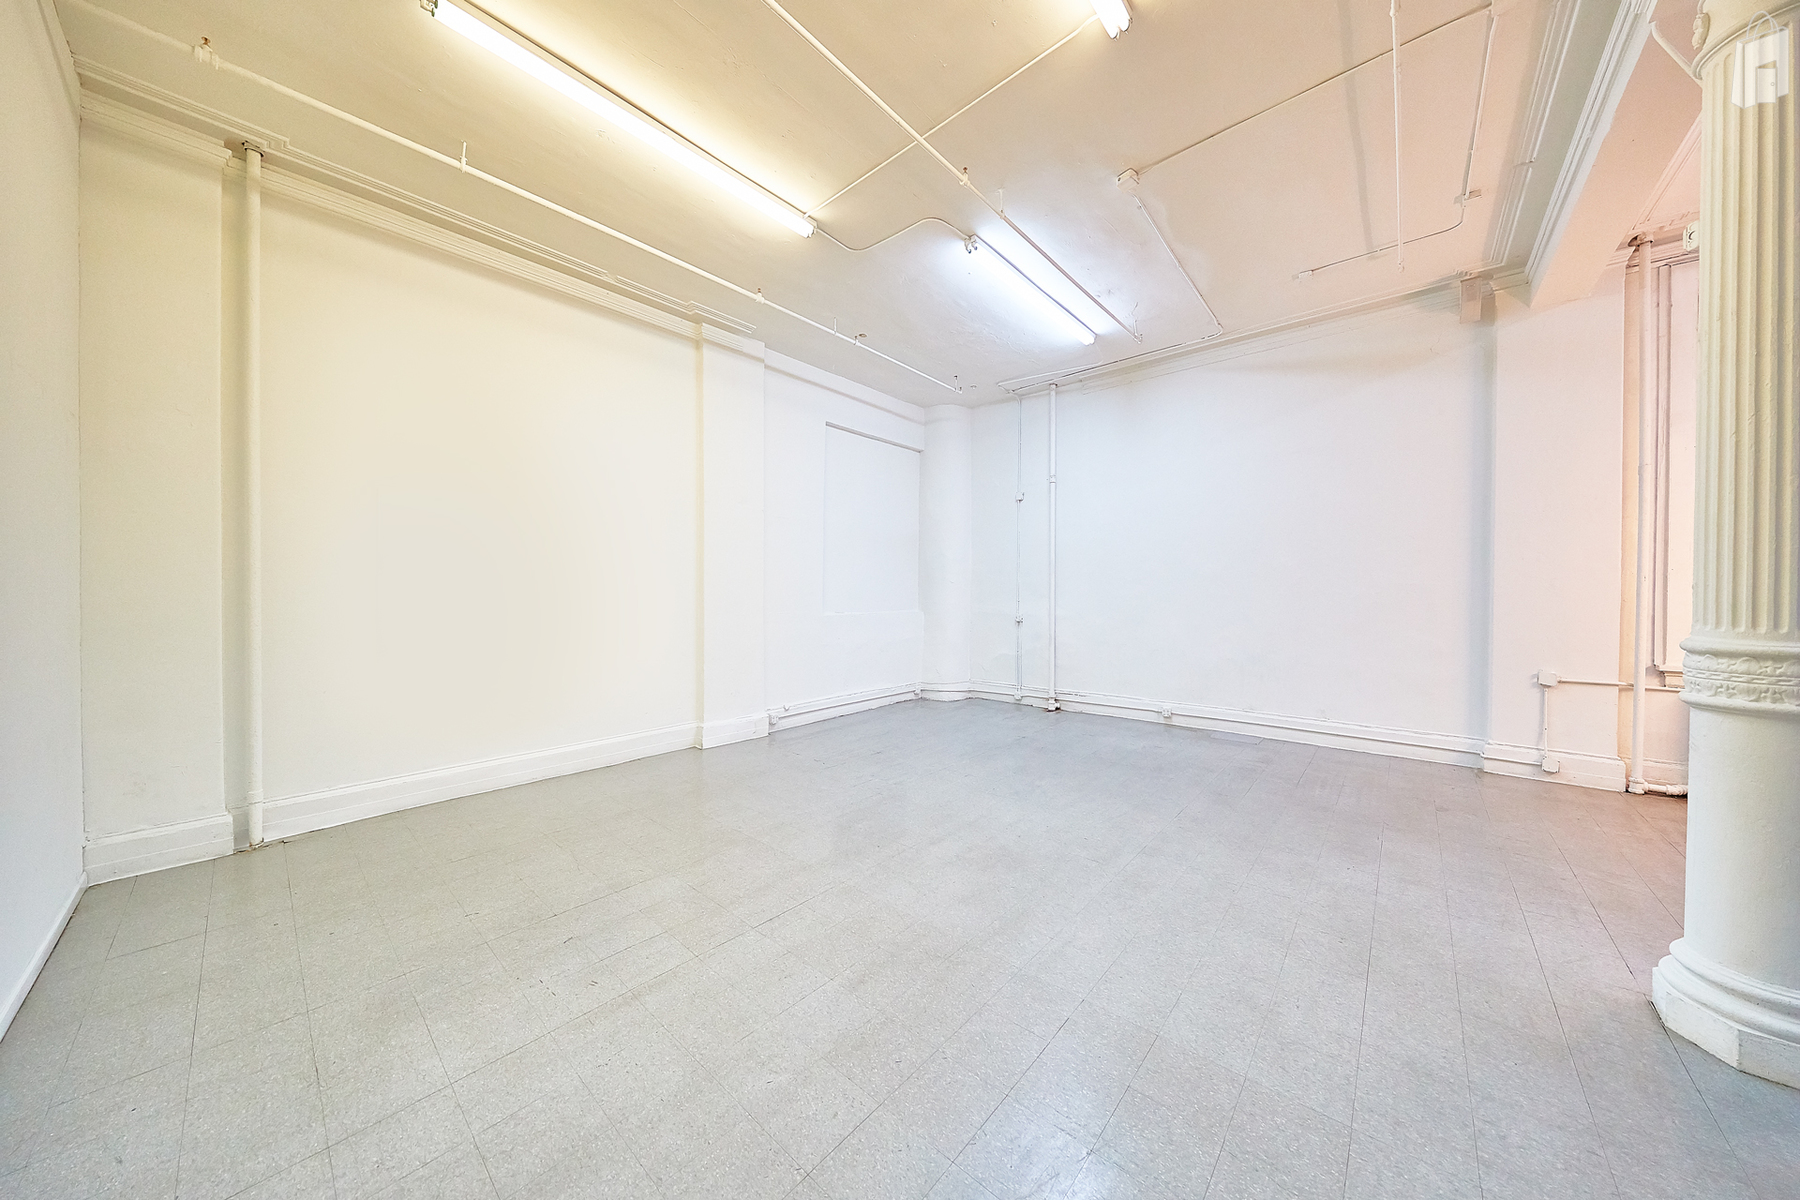 Ideal space for photo shoots and videography.